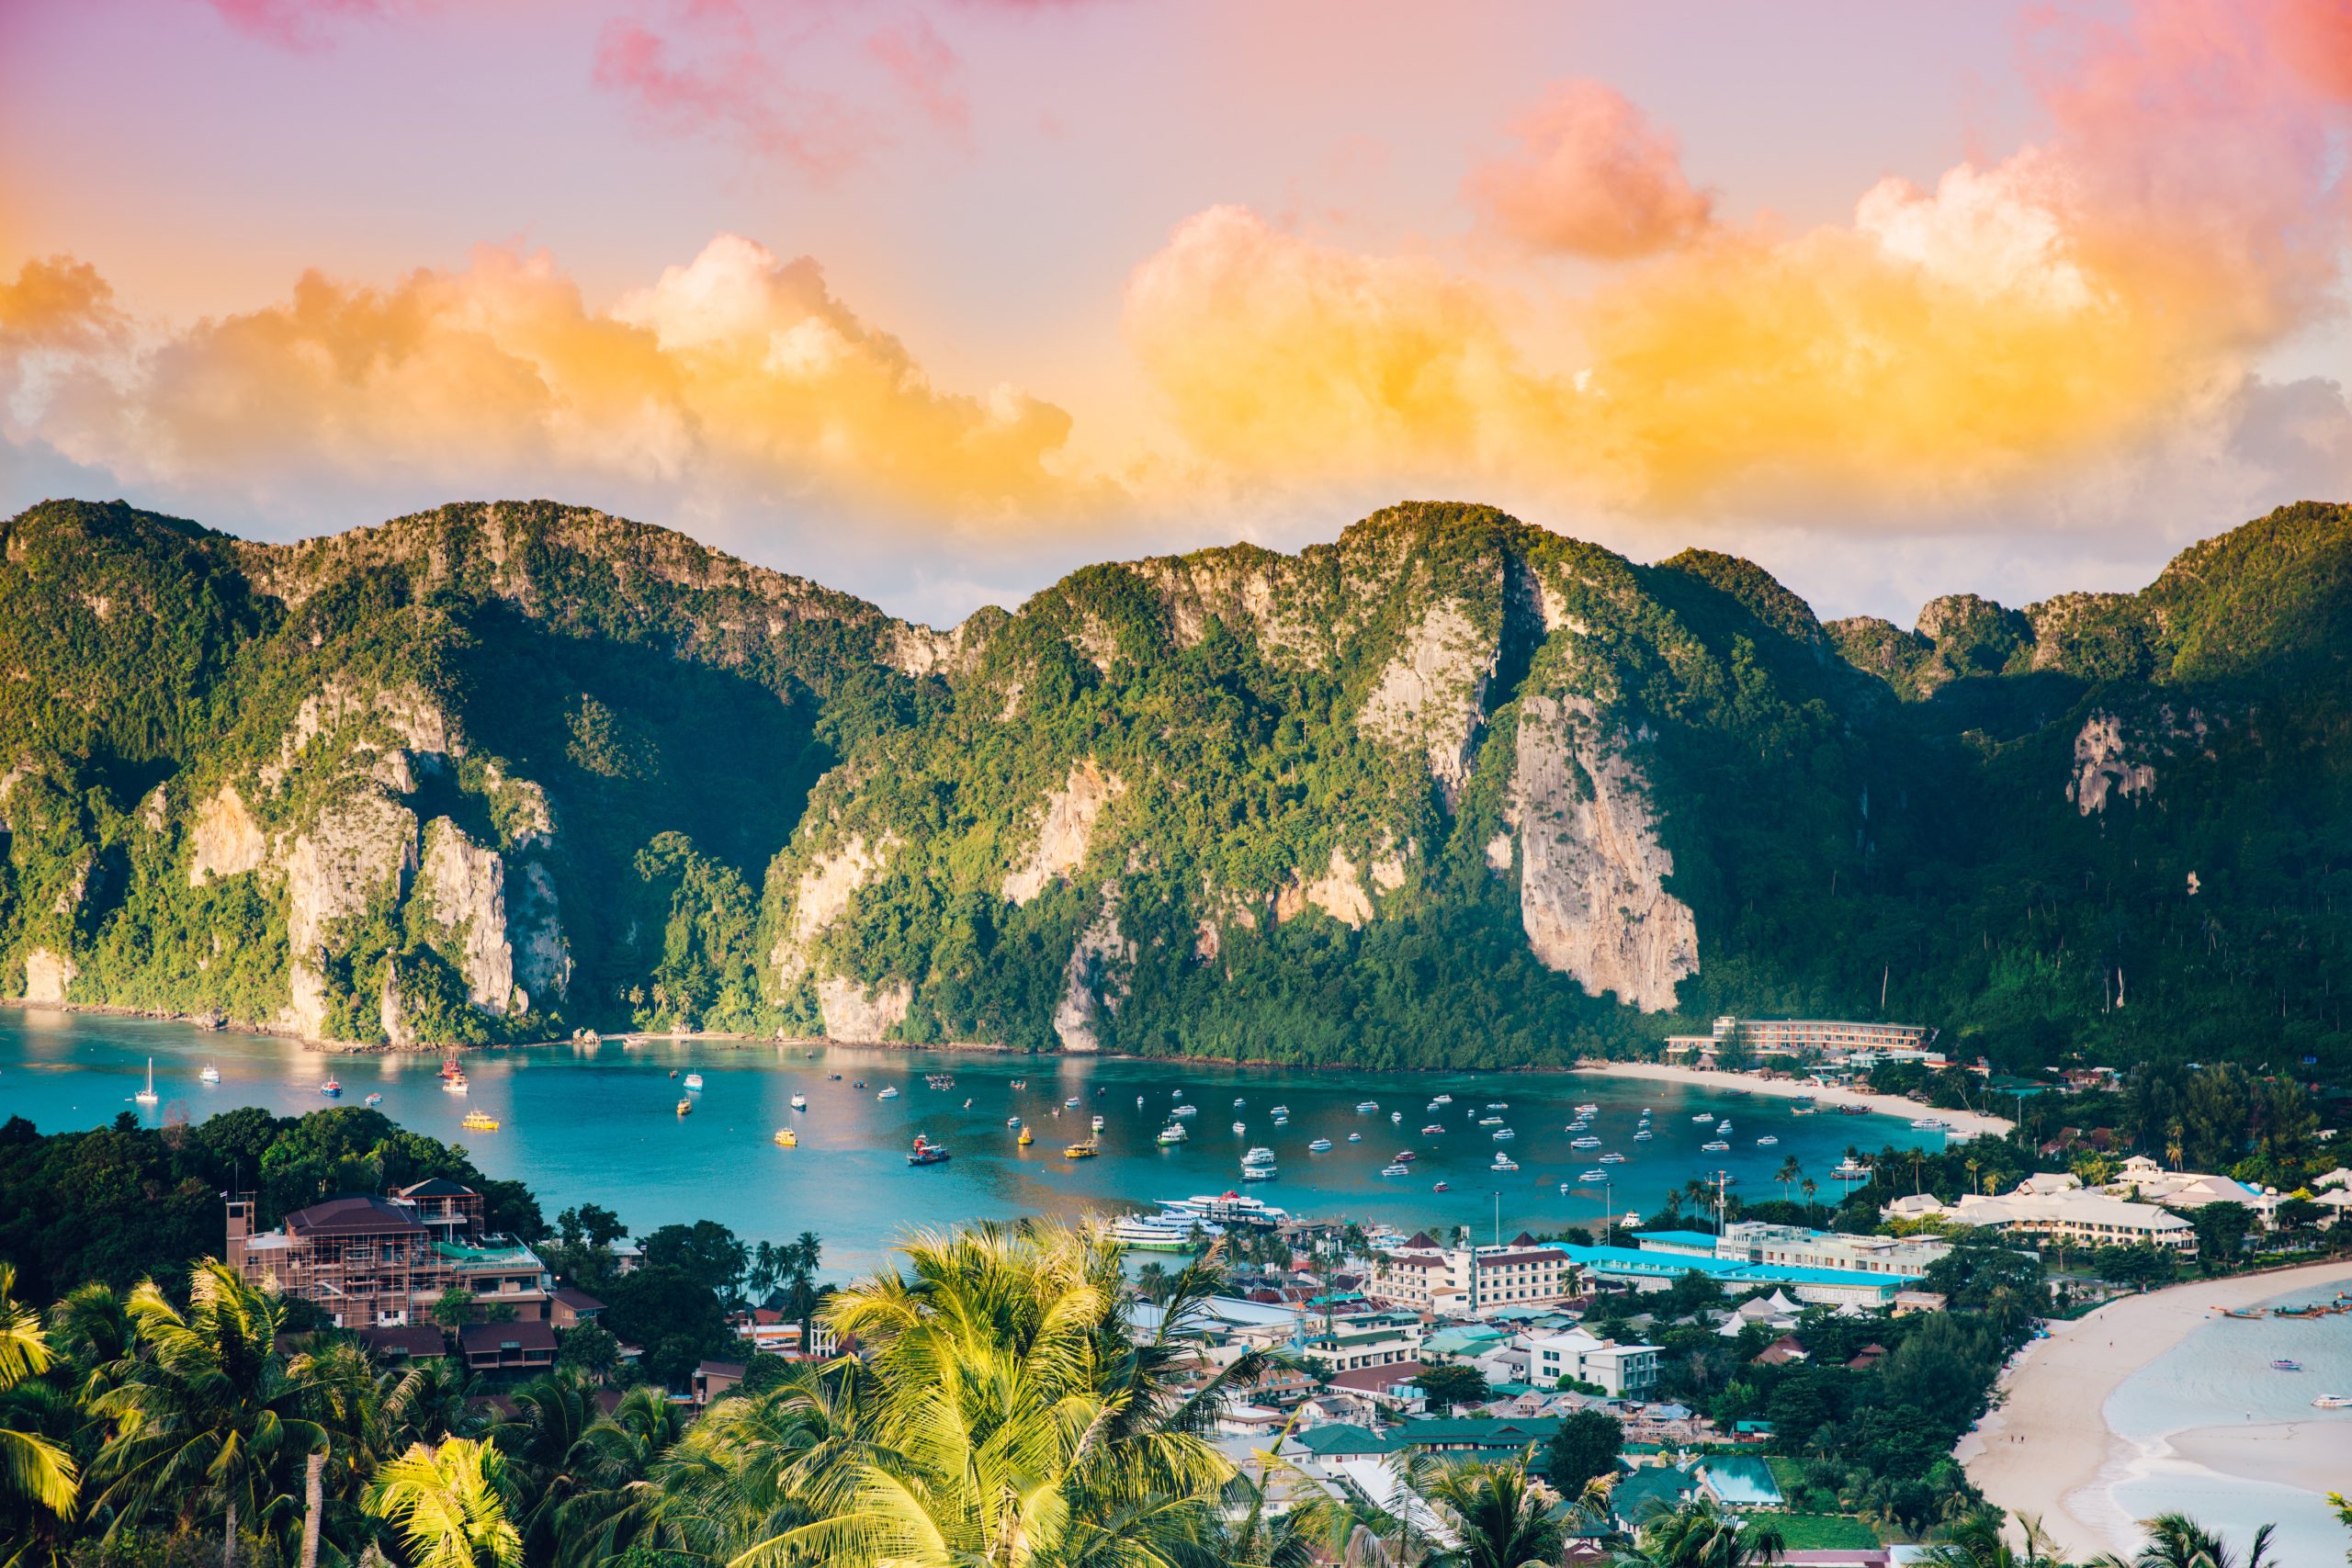 A stunning sunset view of a coastal town nestled between green mountains and blue waters.